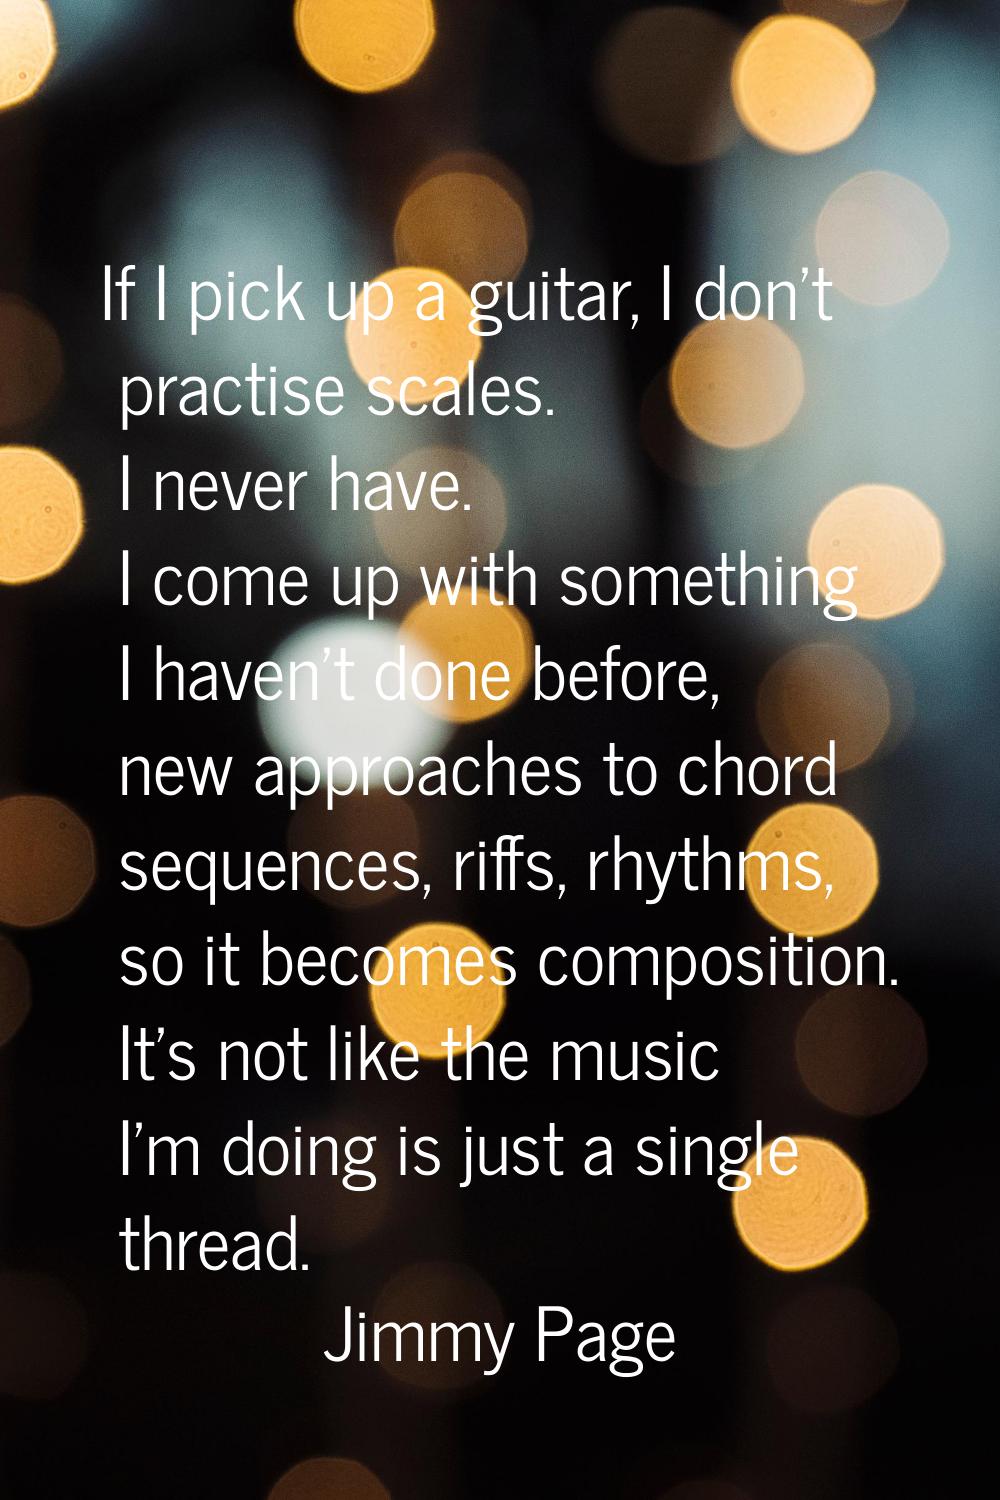 If I pick up a guitar, I don't practise scales. I never have. I come up with something I haven't do